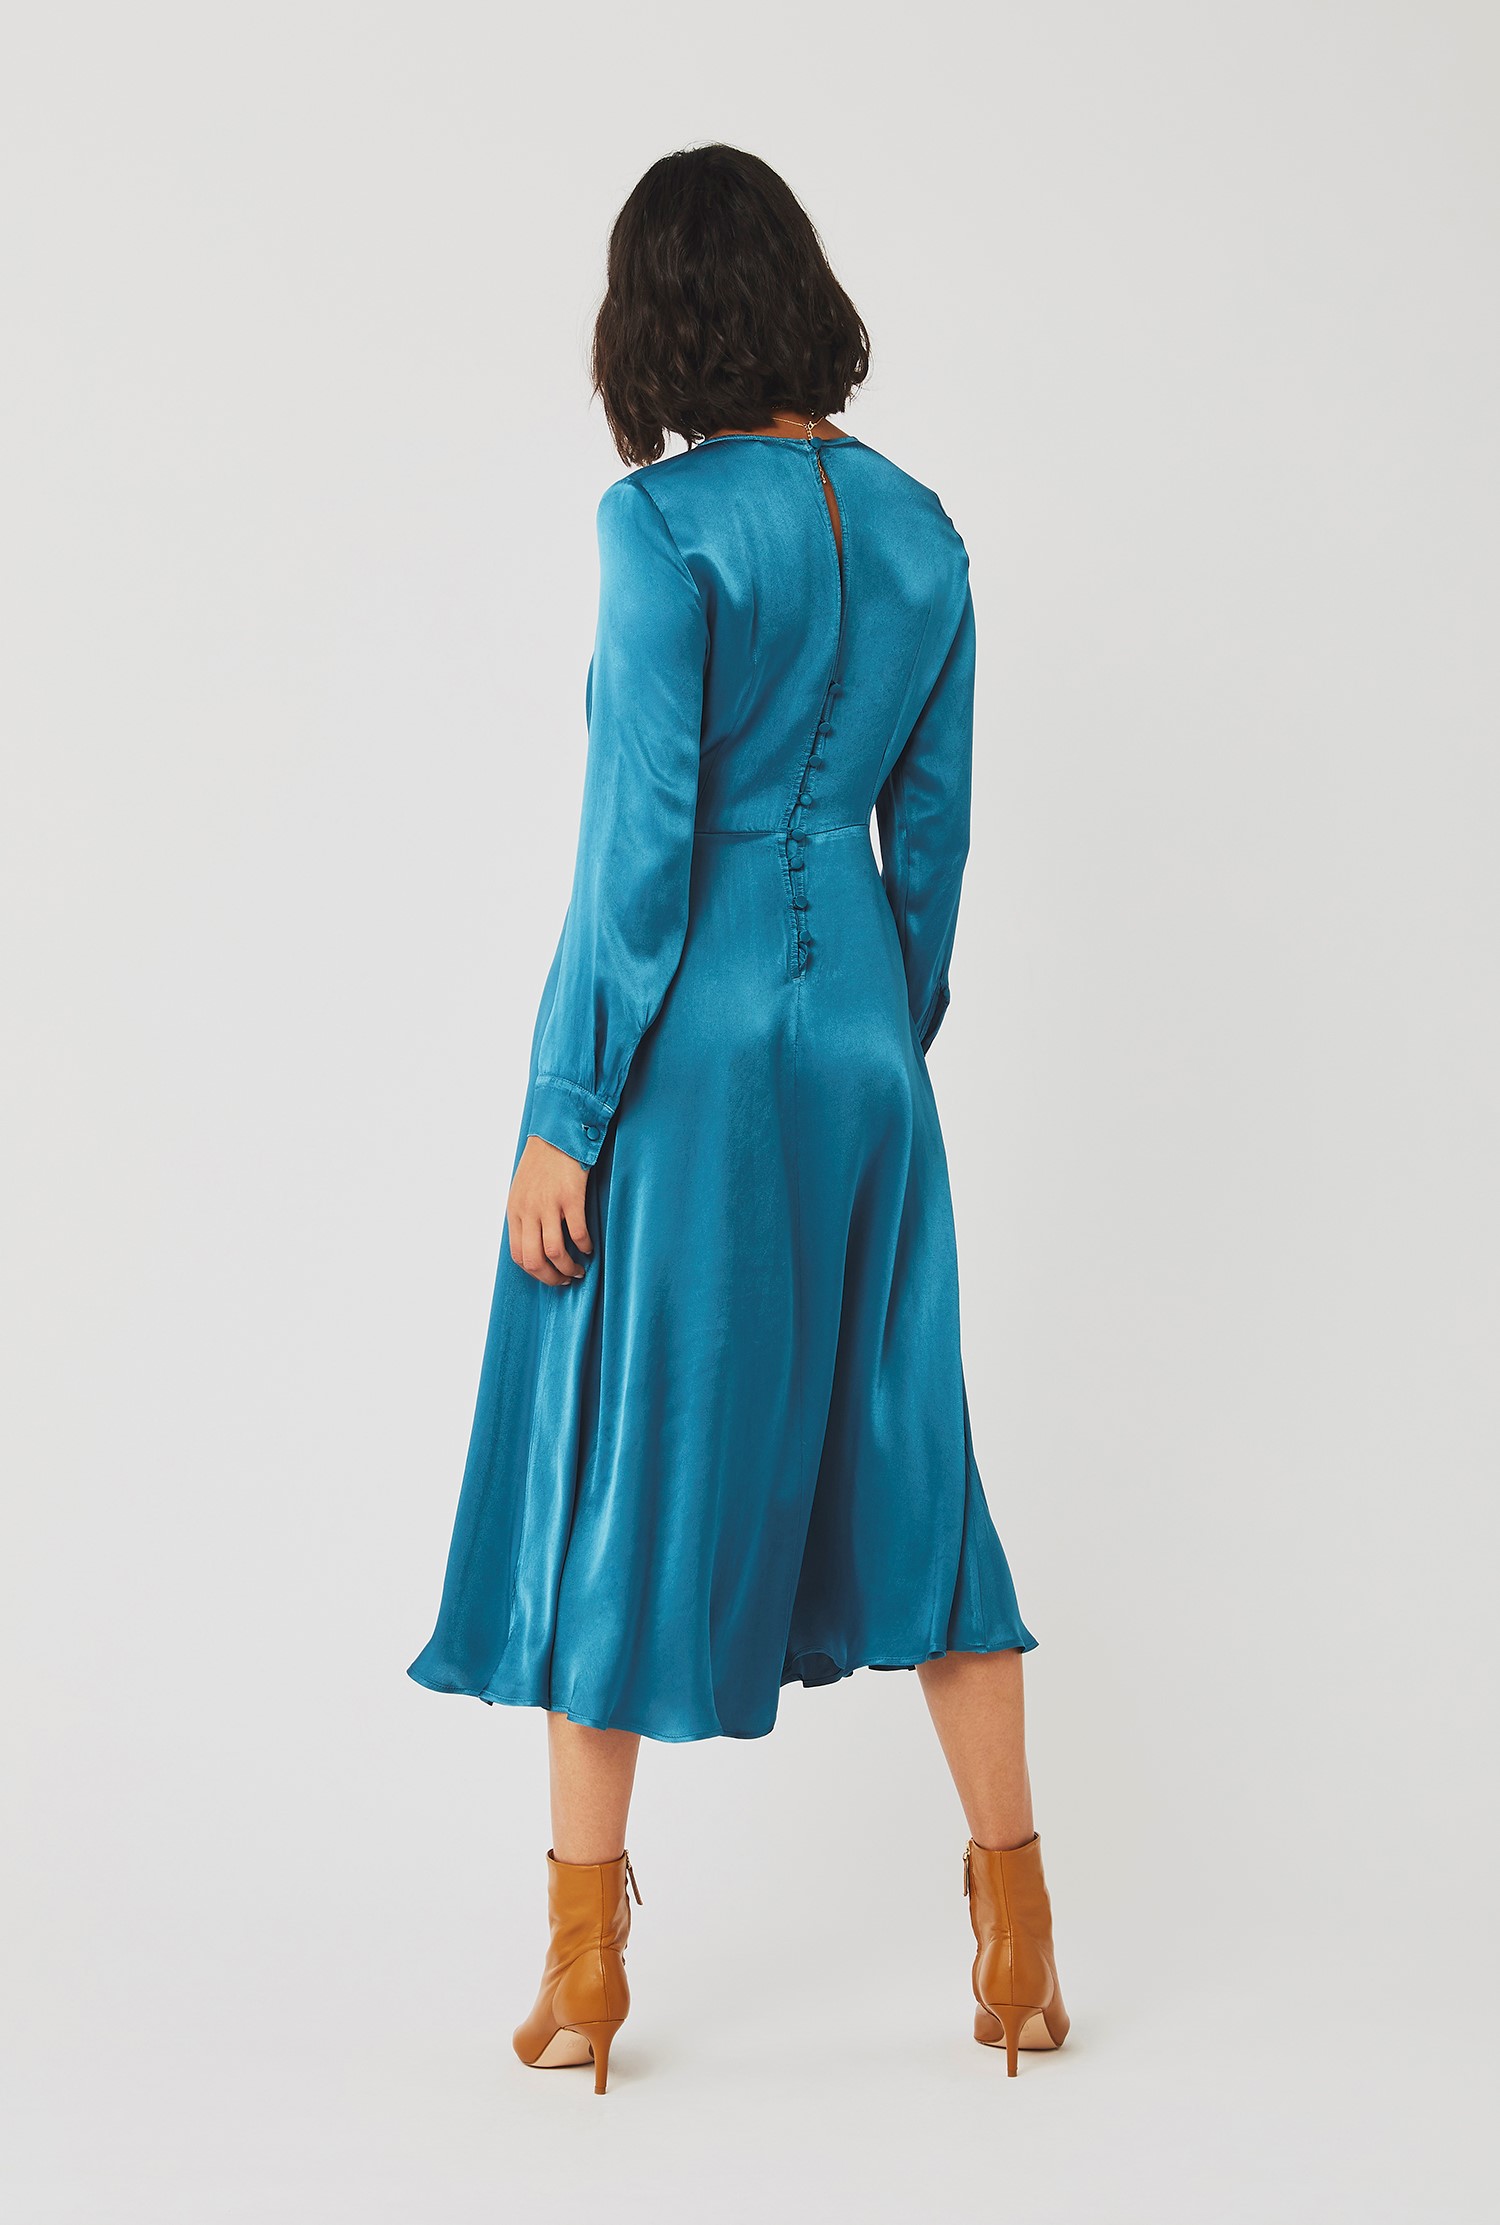 Mindy Teal Satin Midi Dress with Long Sleeves | Ghost London